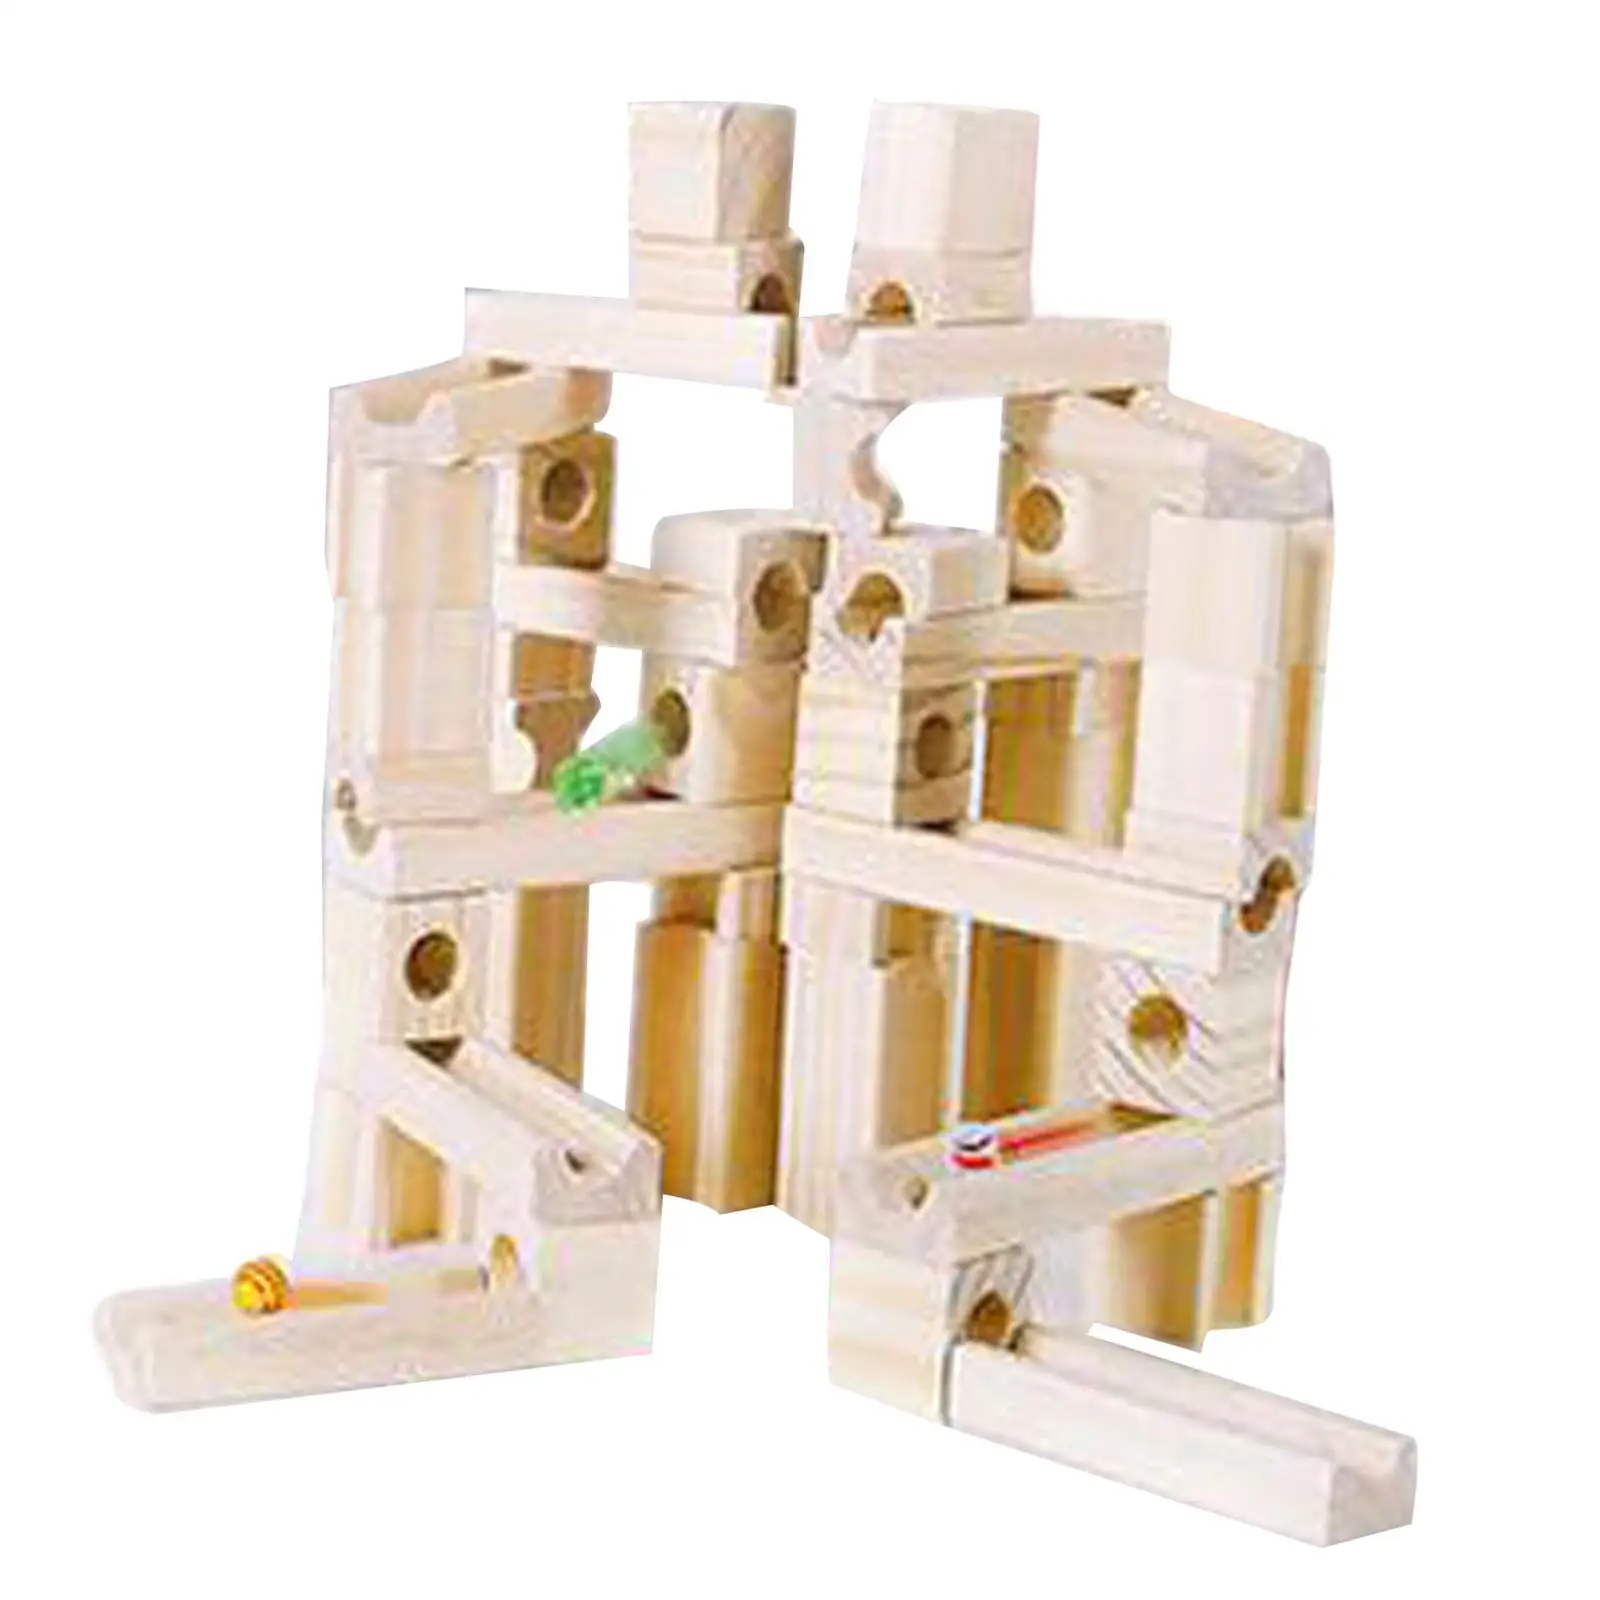 Wood Marble Run Building Blocks Set Early Educational for Birthday Gift Kids